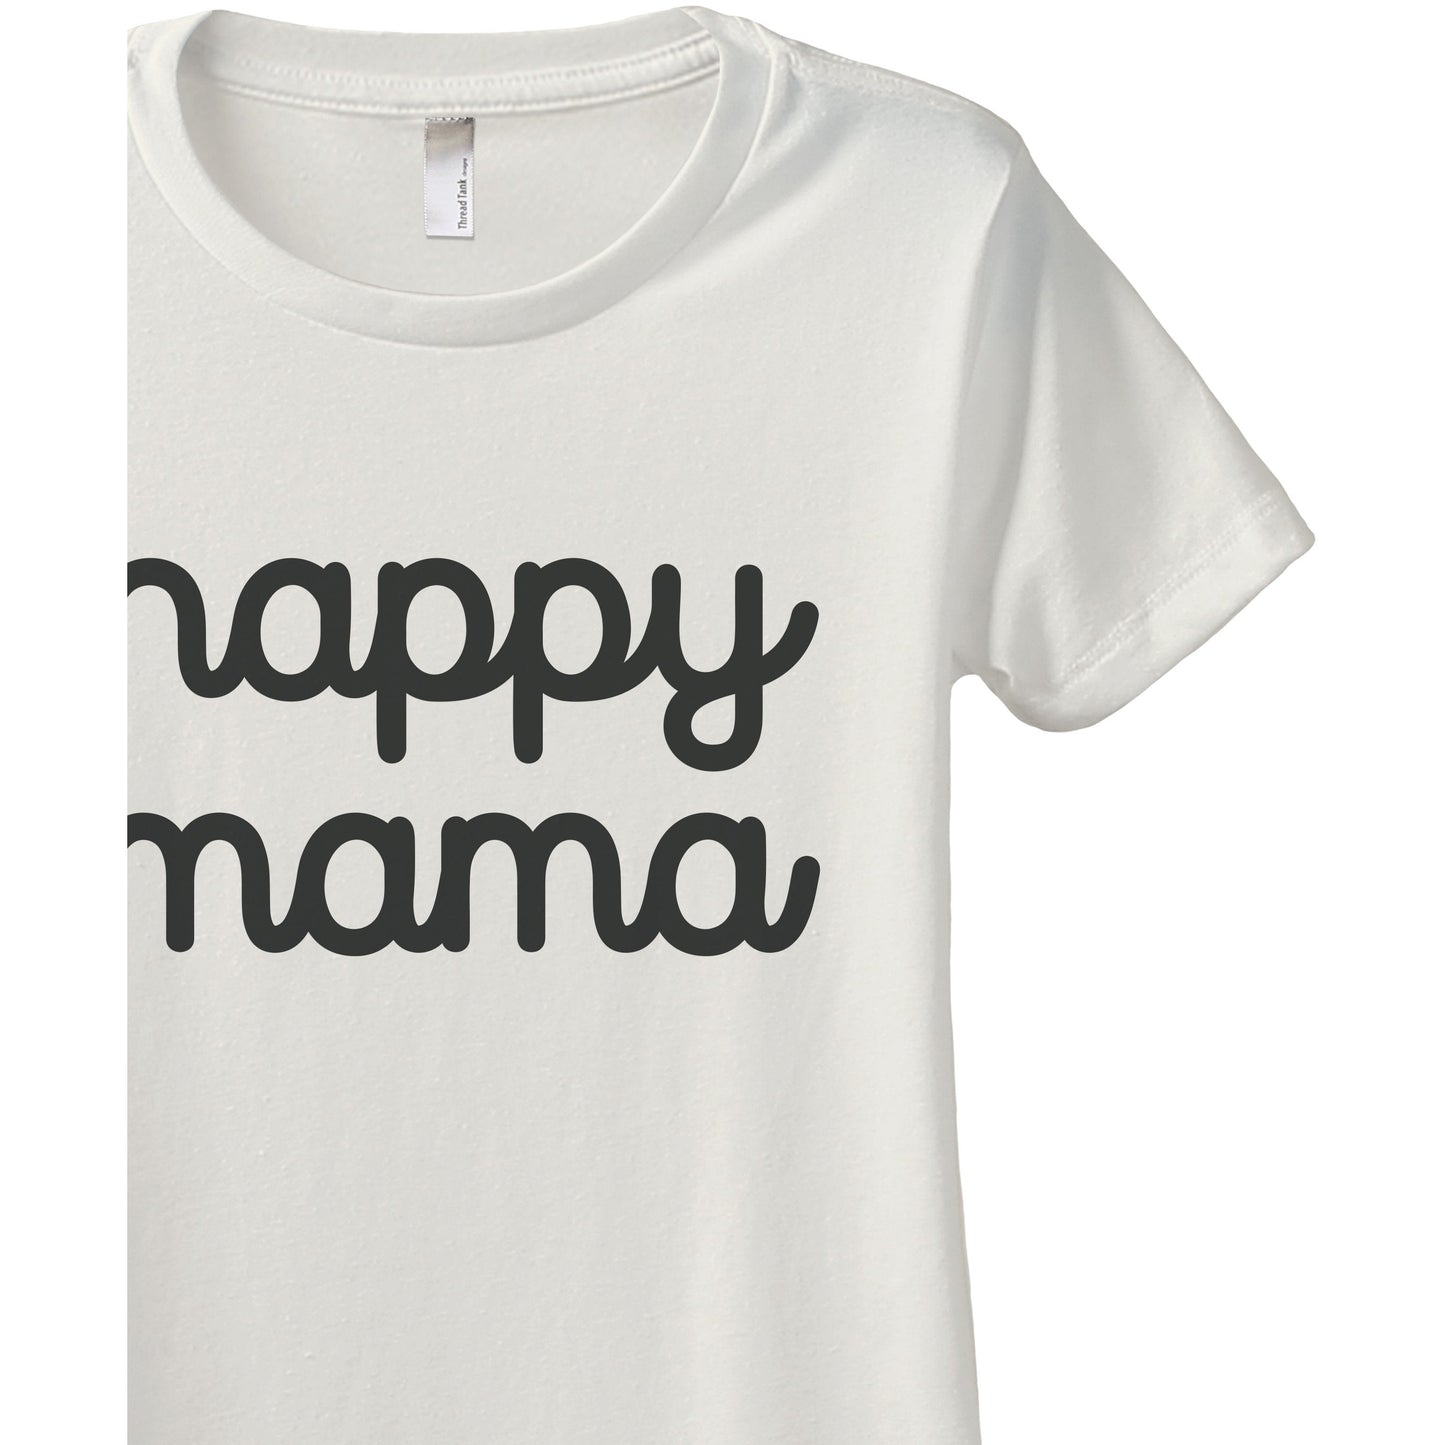 Happy Mama Women's Relaxed Crewneck T-Shirt Top Tee Charcoal Grey Zoom Details